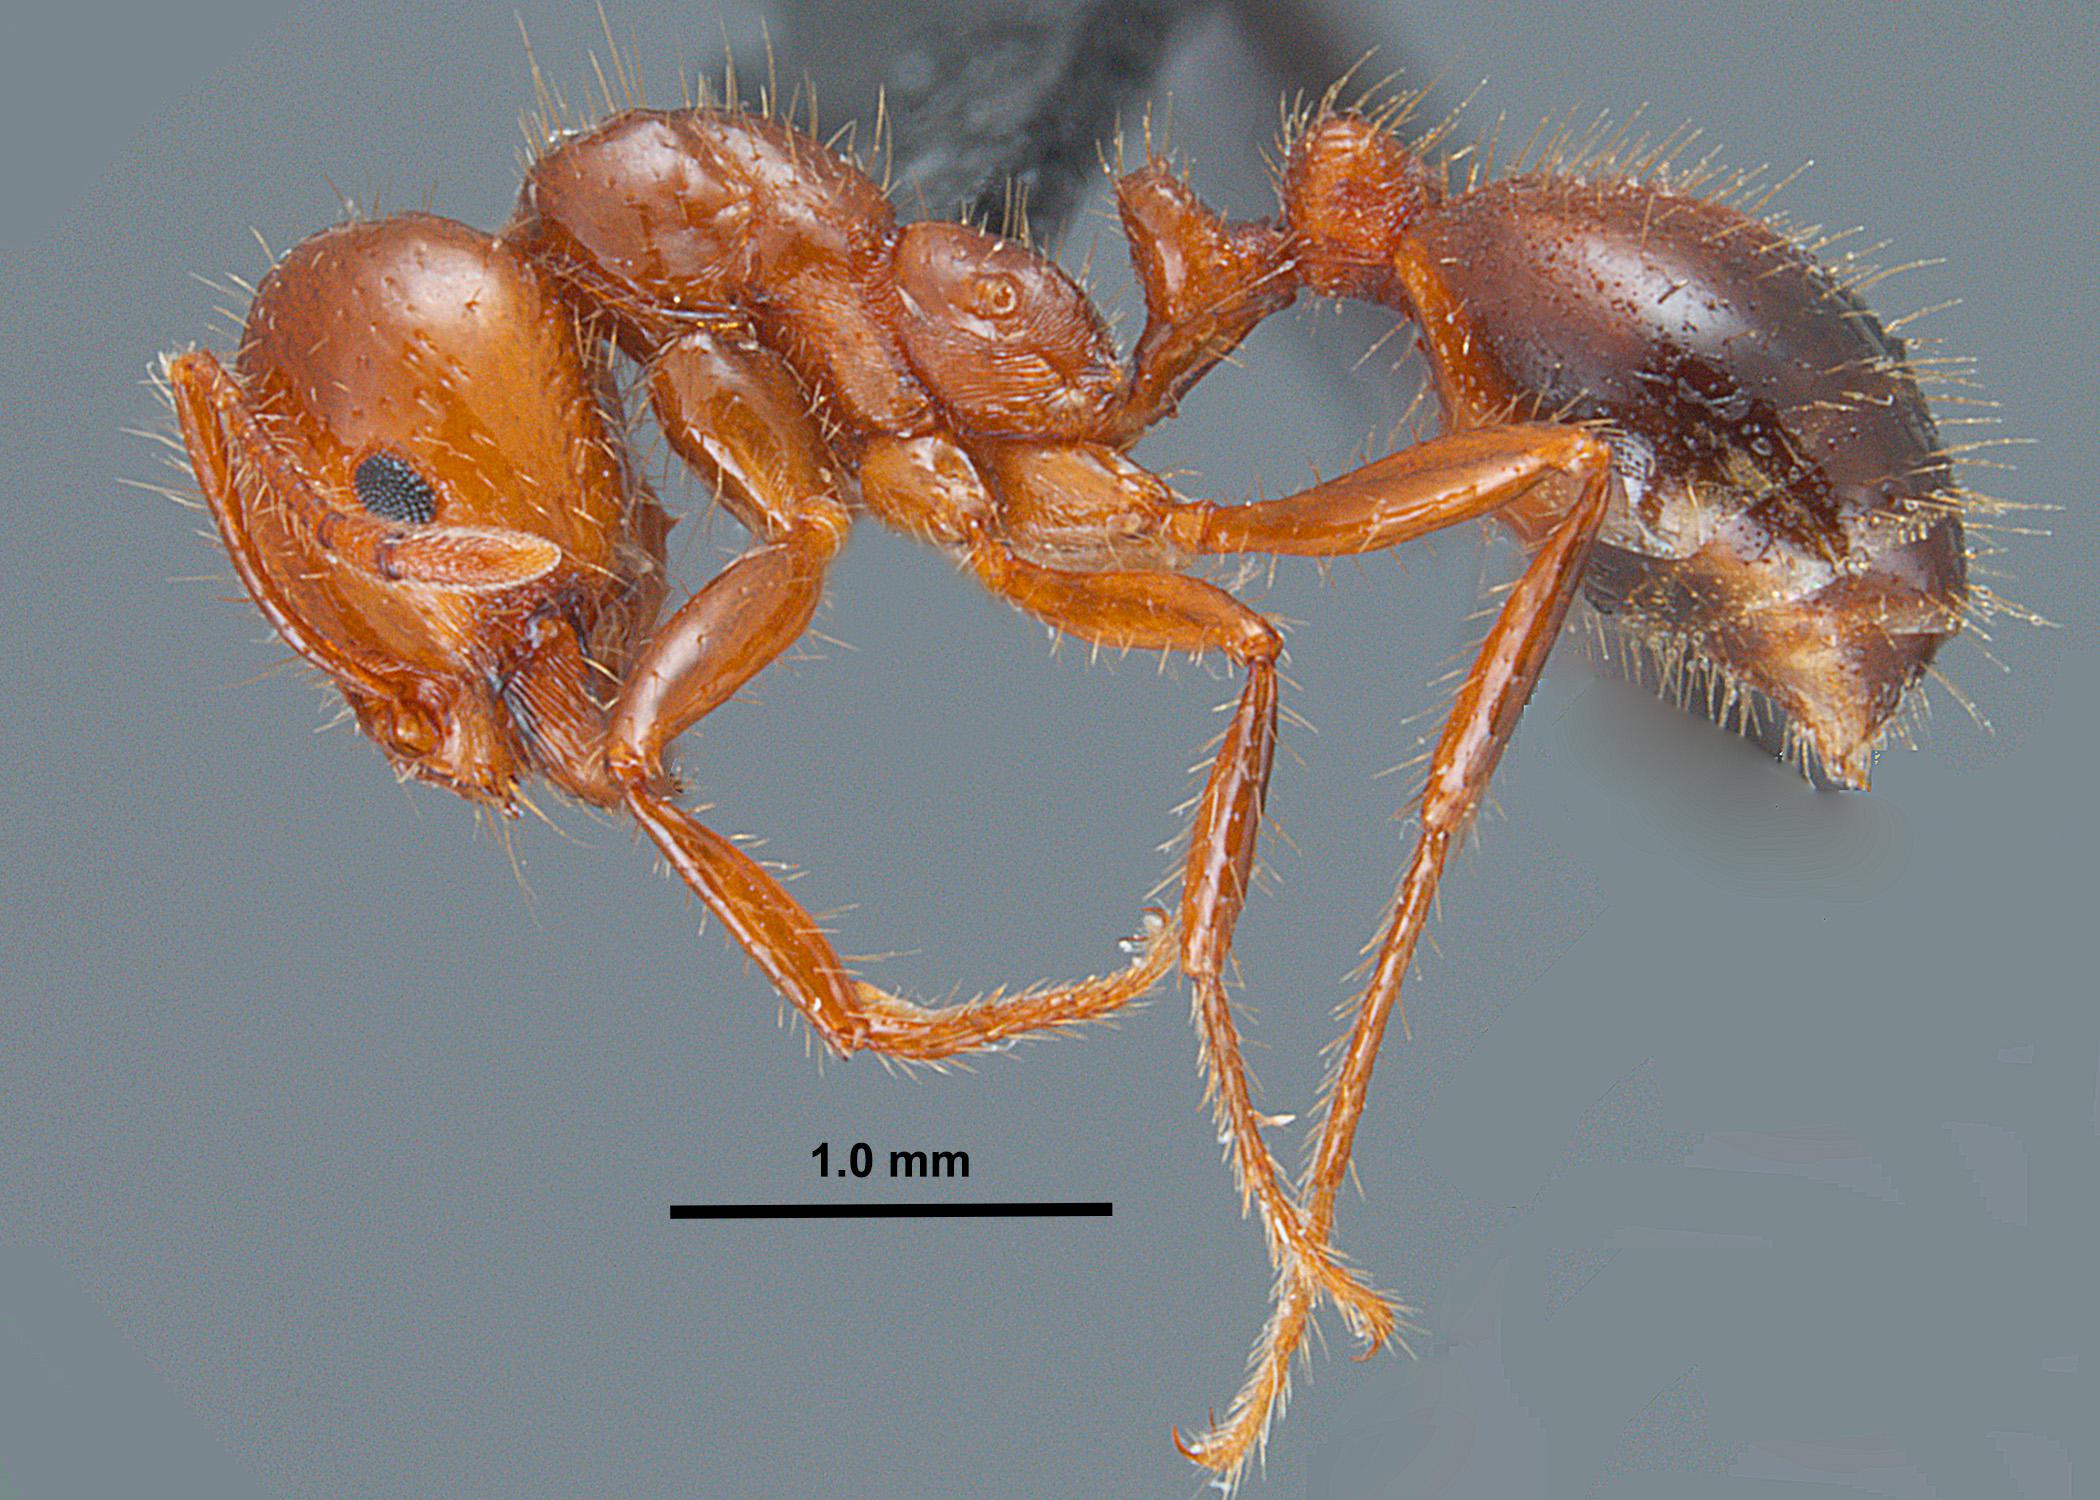 Most fire ants found in Mississippi are a hybrid between the red imported fire ant, pictured here, and the black imported fire ant. (Photo by Mississippi Entomological Museum/Joe A. MacGown)